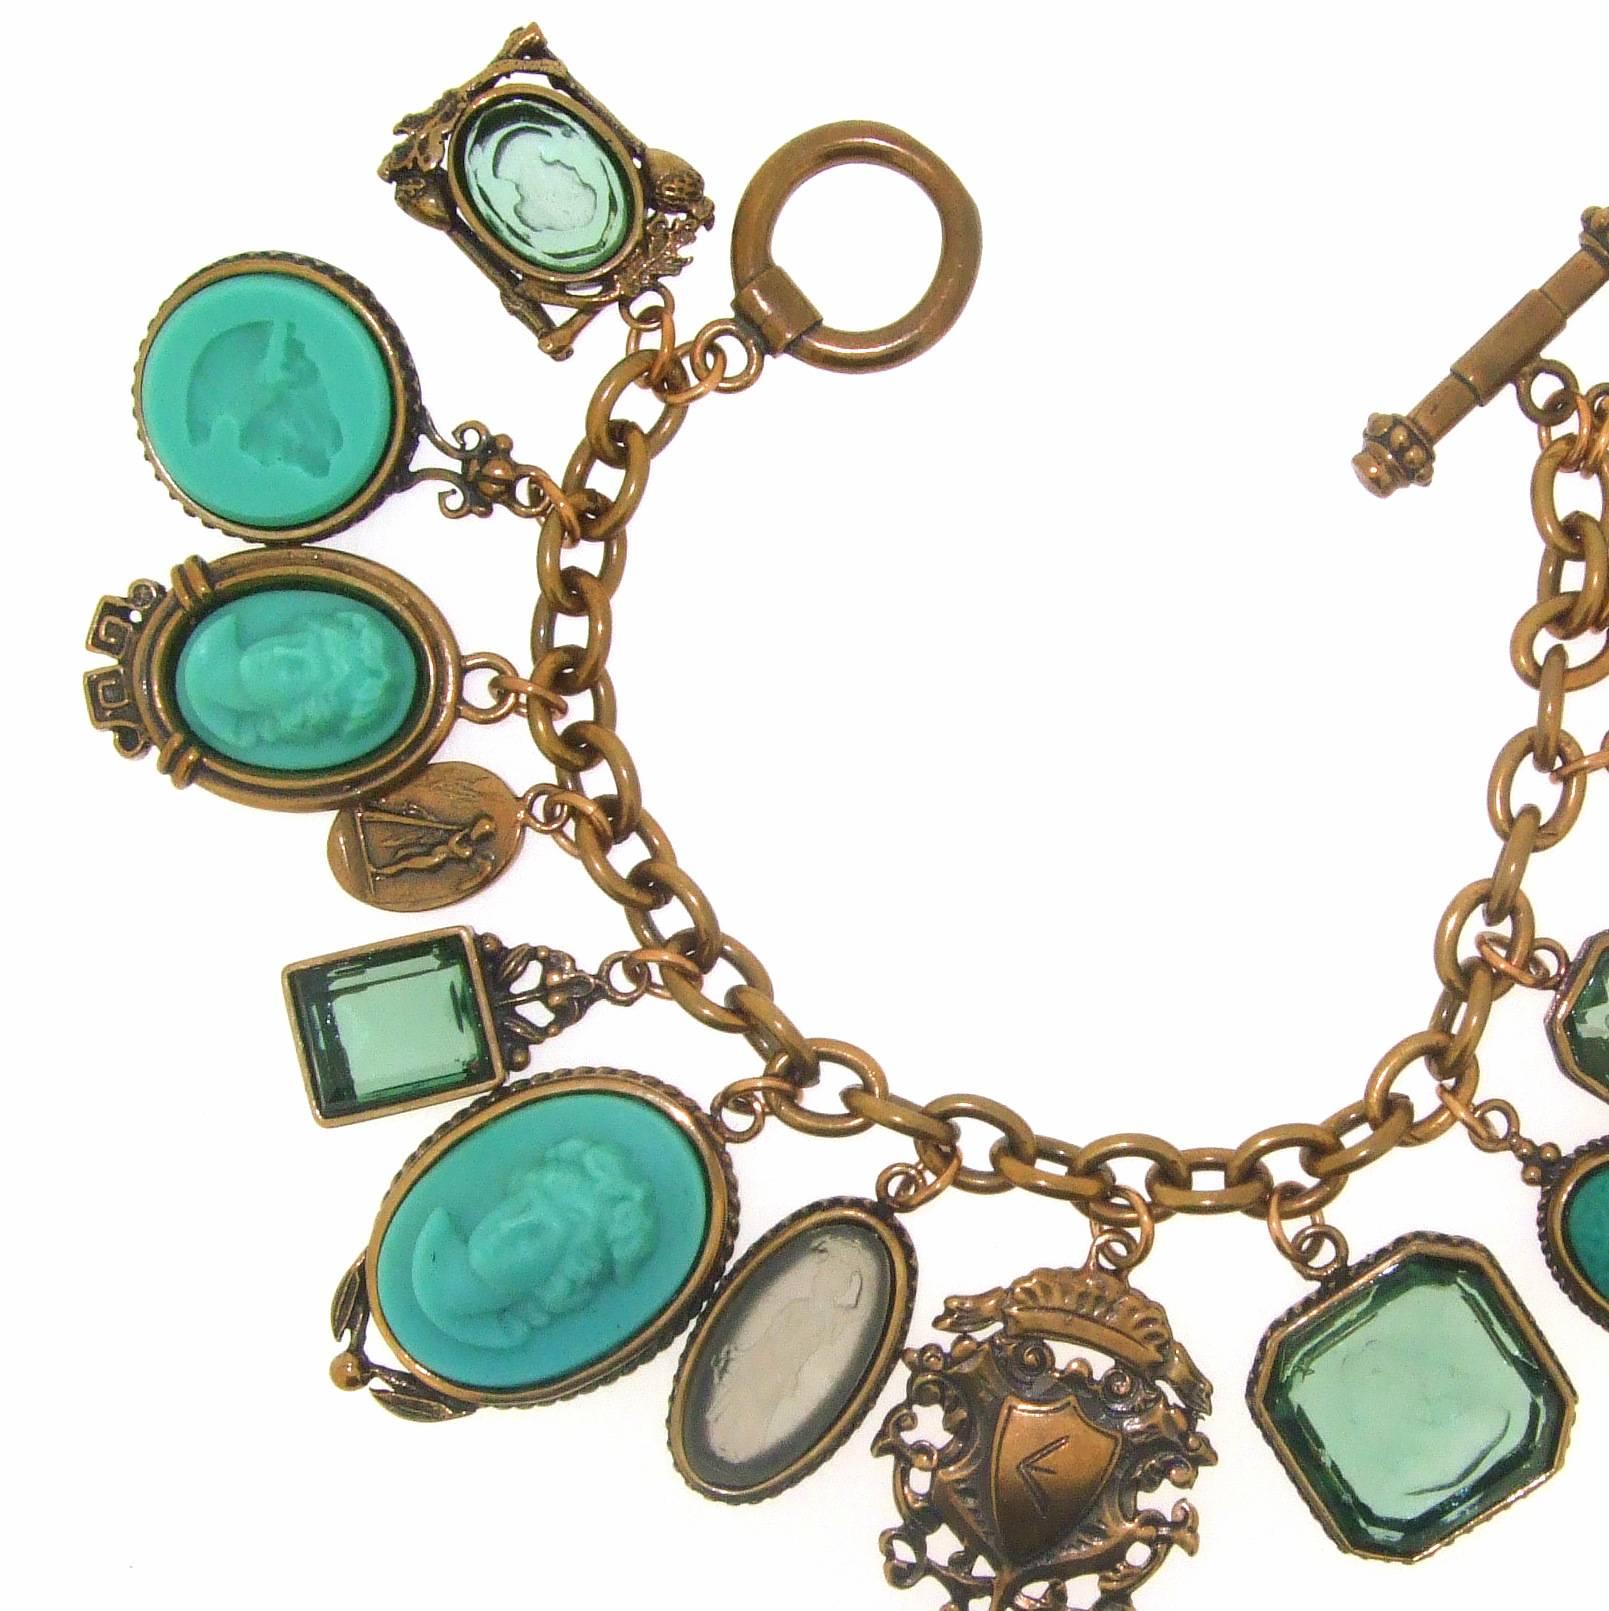 A charm bracelet by Extasia USA featuring hand pressed German glass cameos and intaglios set in bronze chain and metal casings. 

The largest charm measures 3.5cm by 2.1cm. 